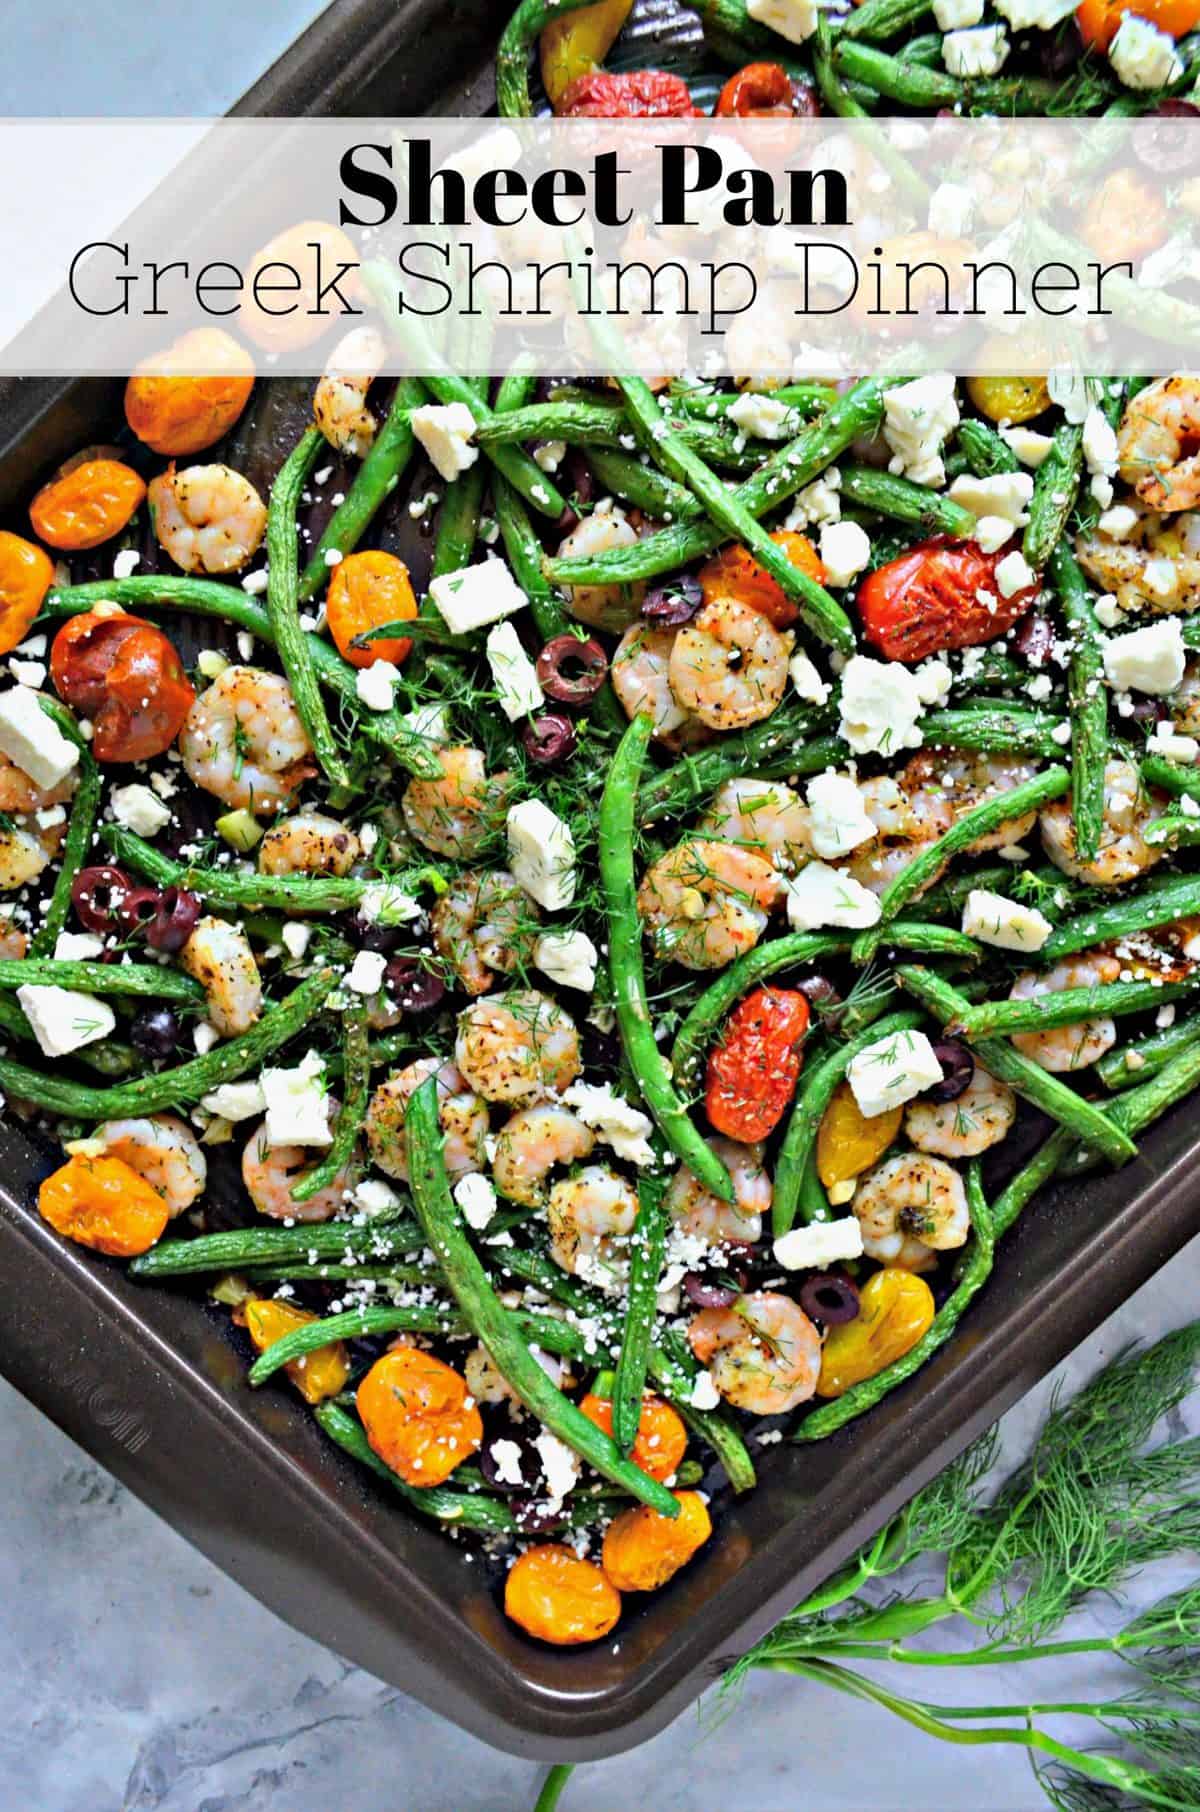 Sheet Pan of feta, green beans, cherry tomatoes, kalamata olives, dill, and shrimp with title text.